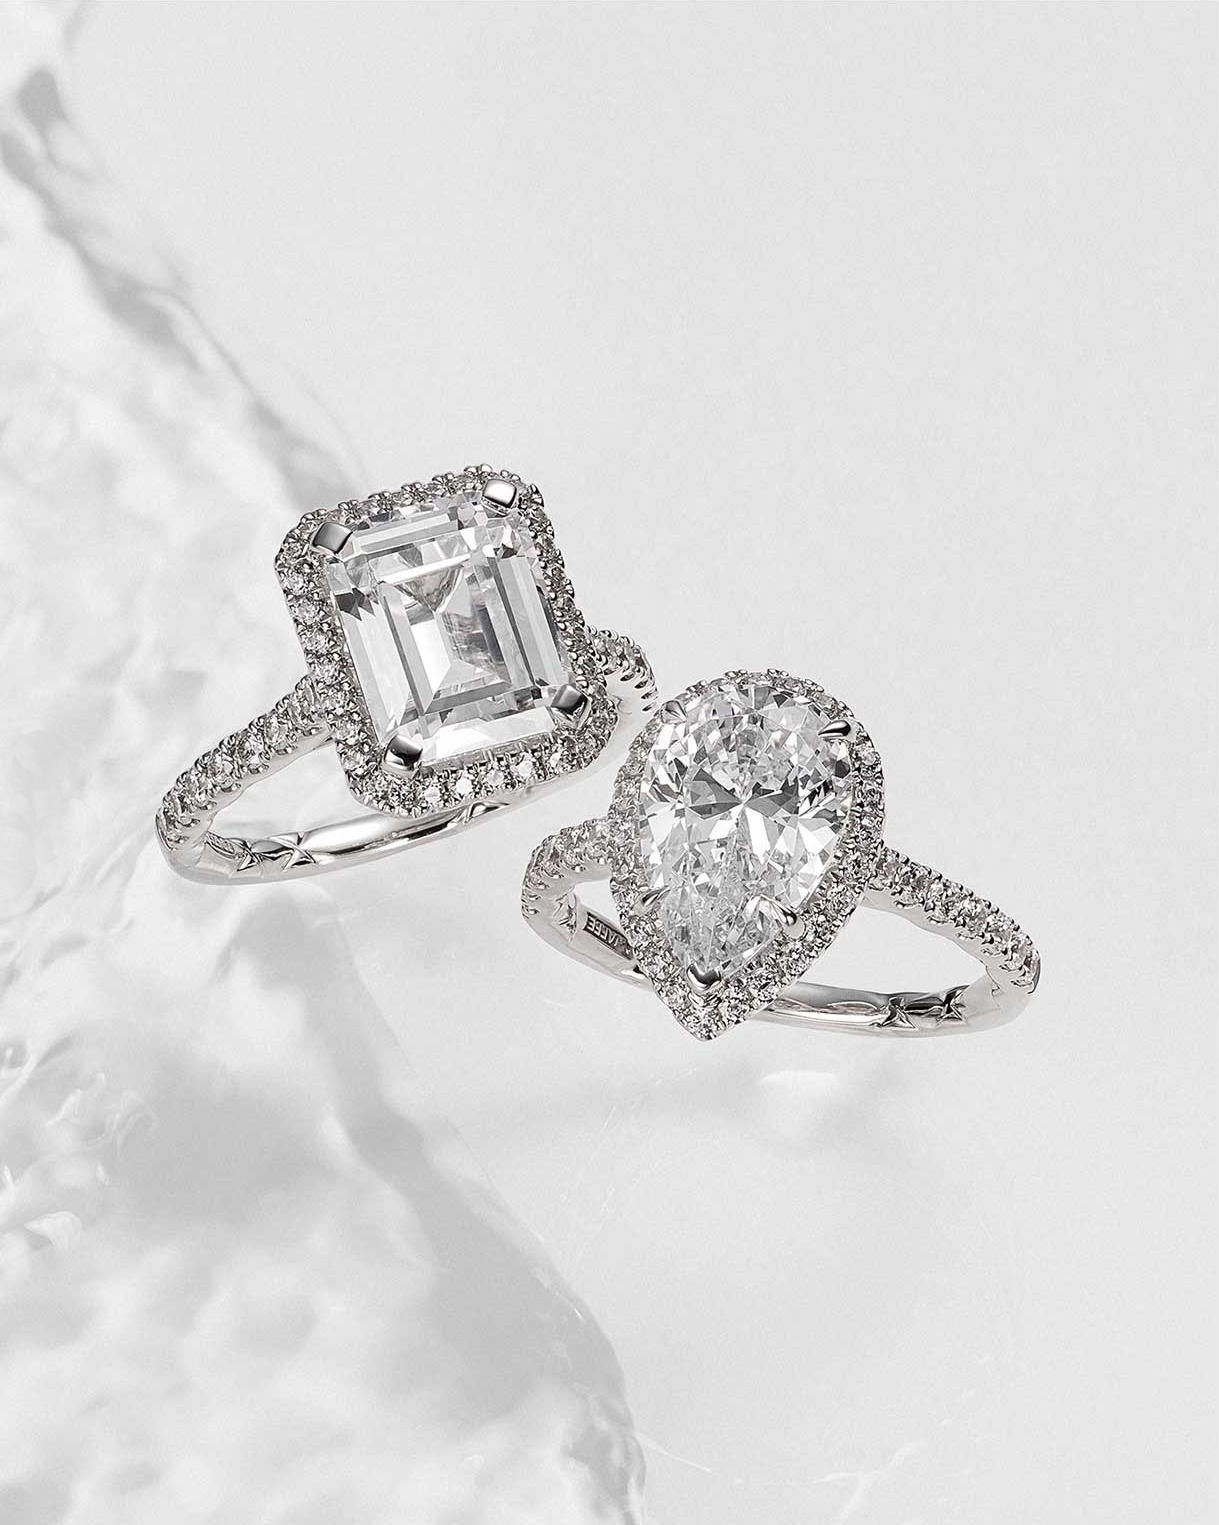 View Engagement Rings